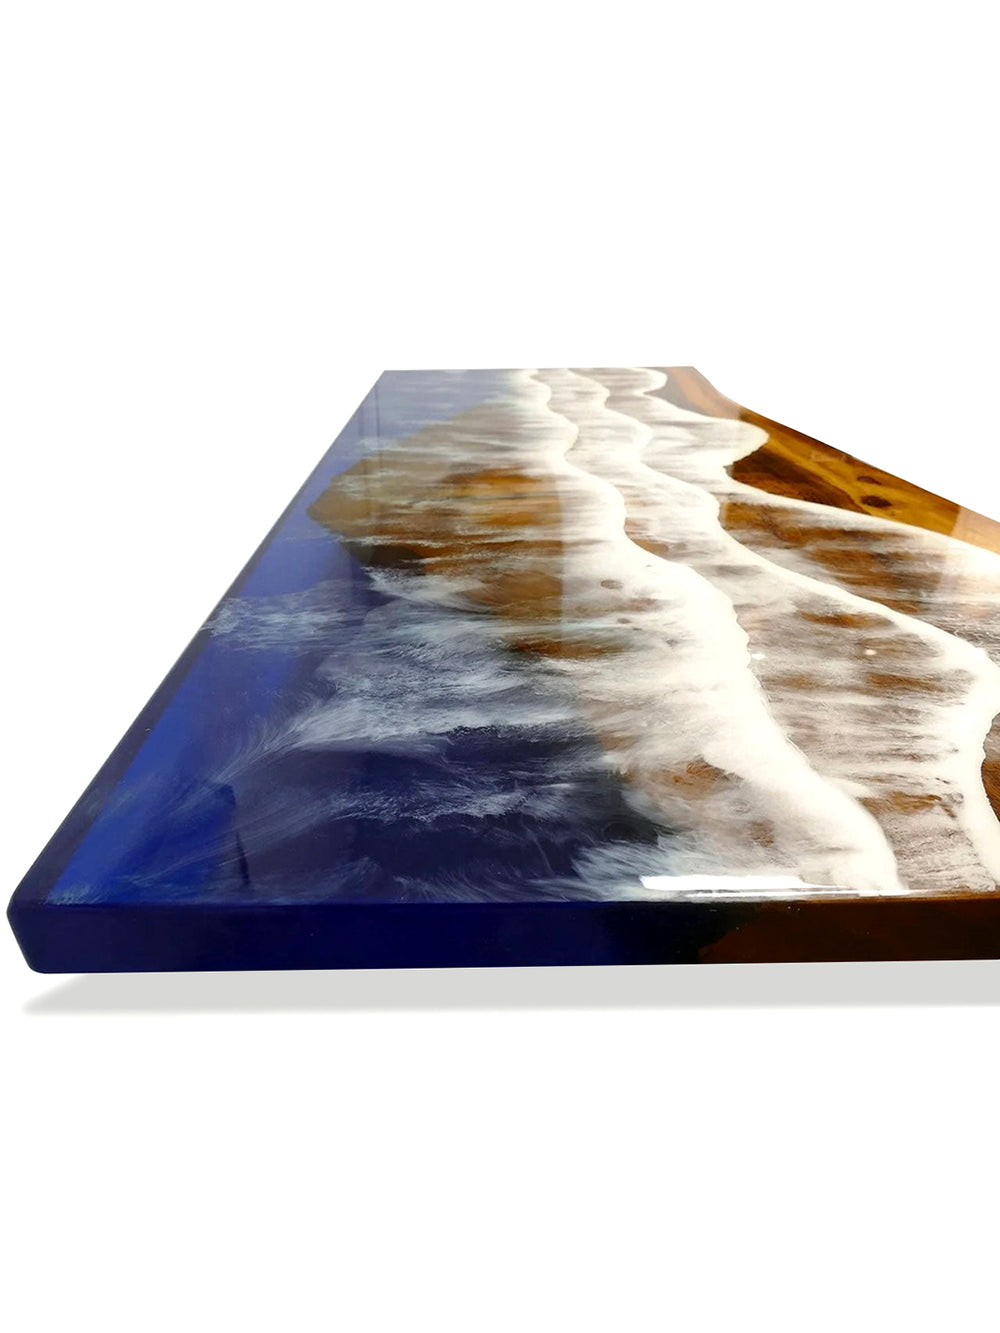 Handcrafted River Beach Epoxy Resin Wooden Dining Table | 180x80cm Made 4 Decor Tables MDR0011-1